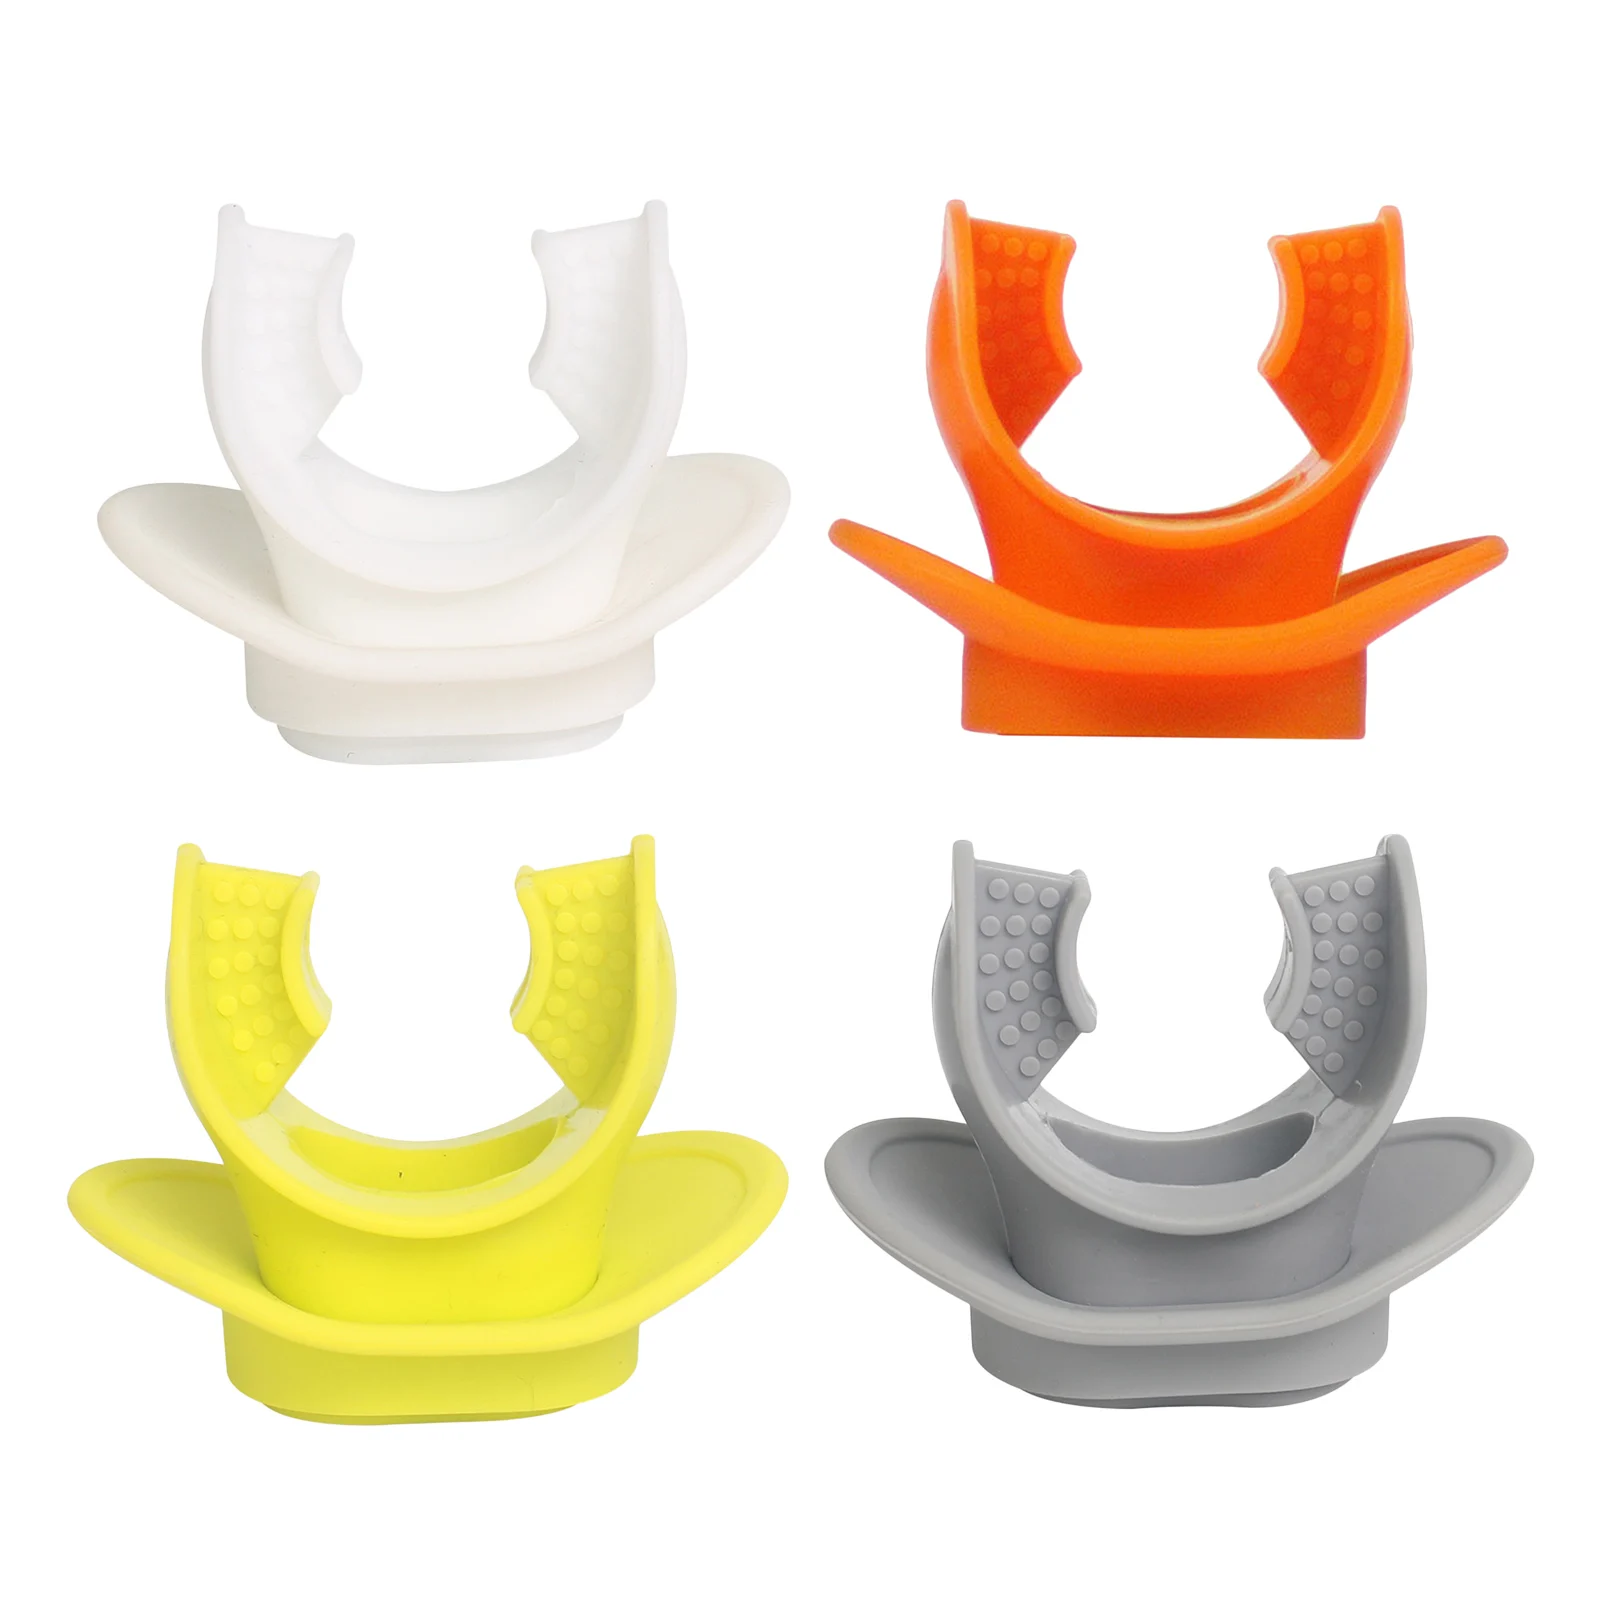 Silicone Diving Bite Mouth Piece Moldable for Scuba Regulators and Snorkels